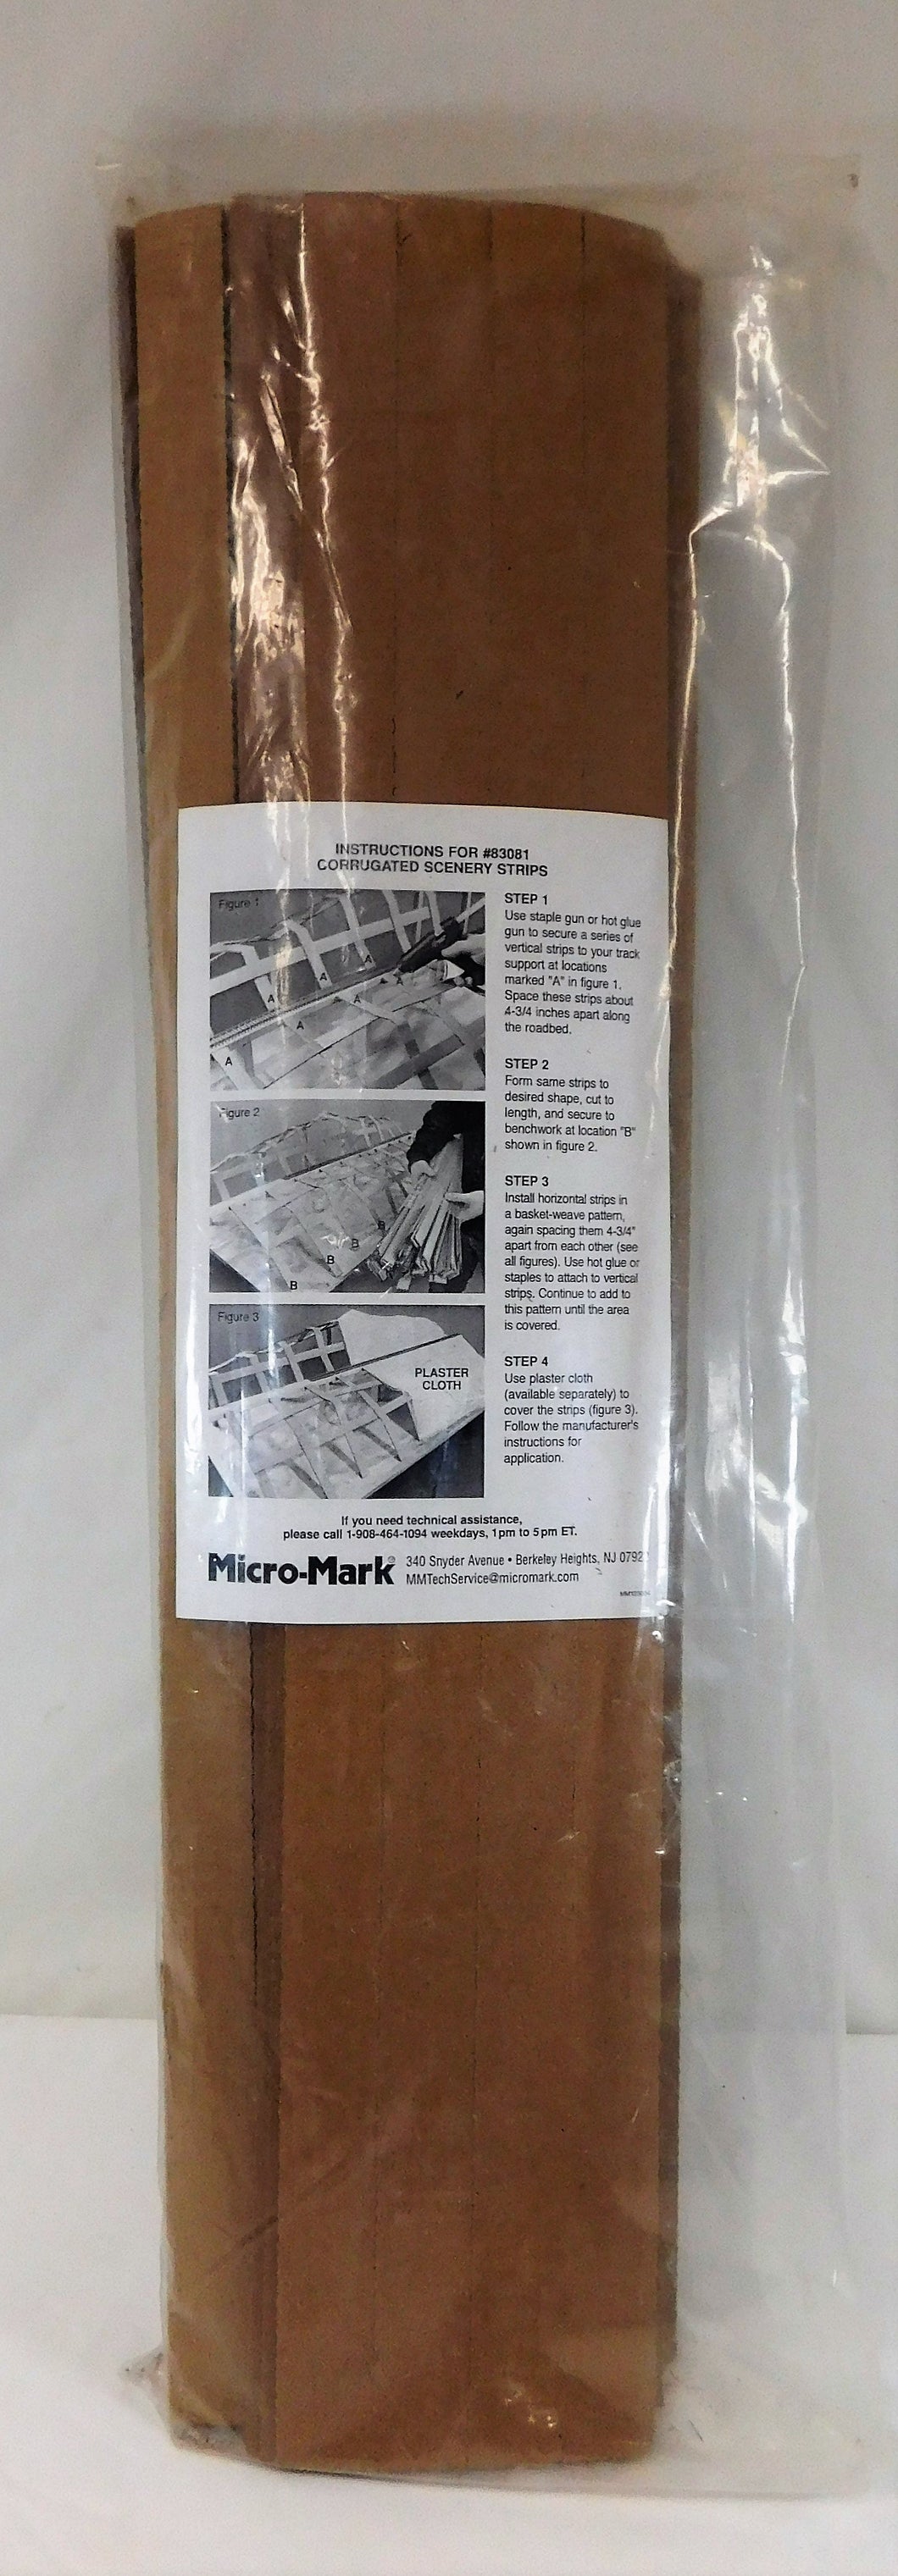 TWO Micro-Mark 83081 Corrugated Scenery Strips for Layouts 1